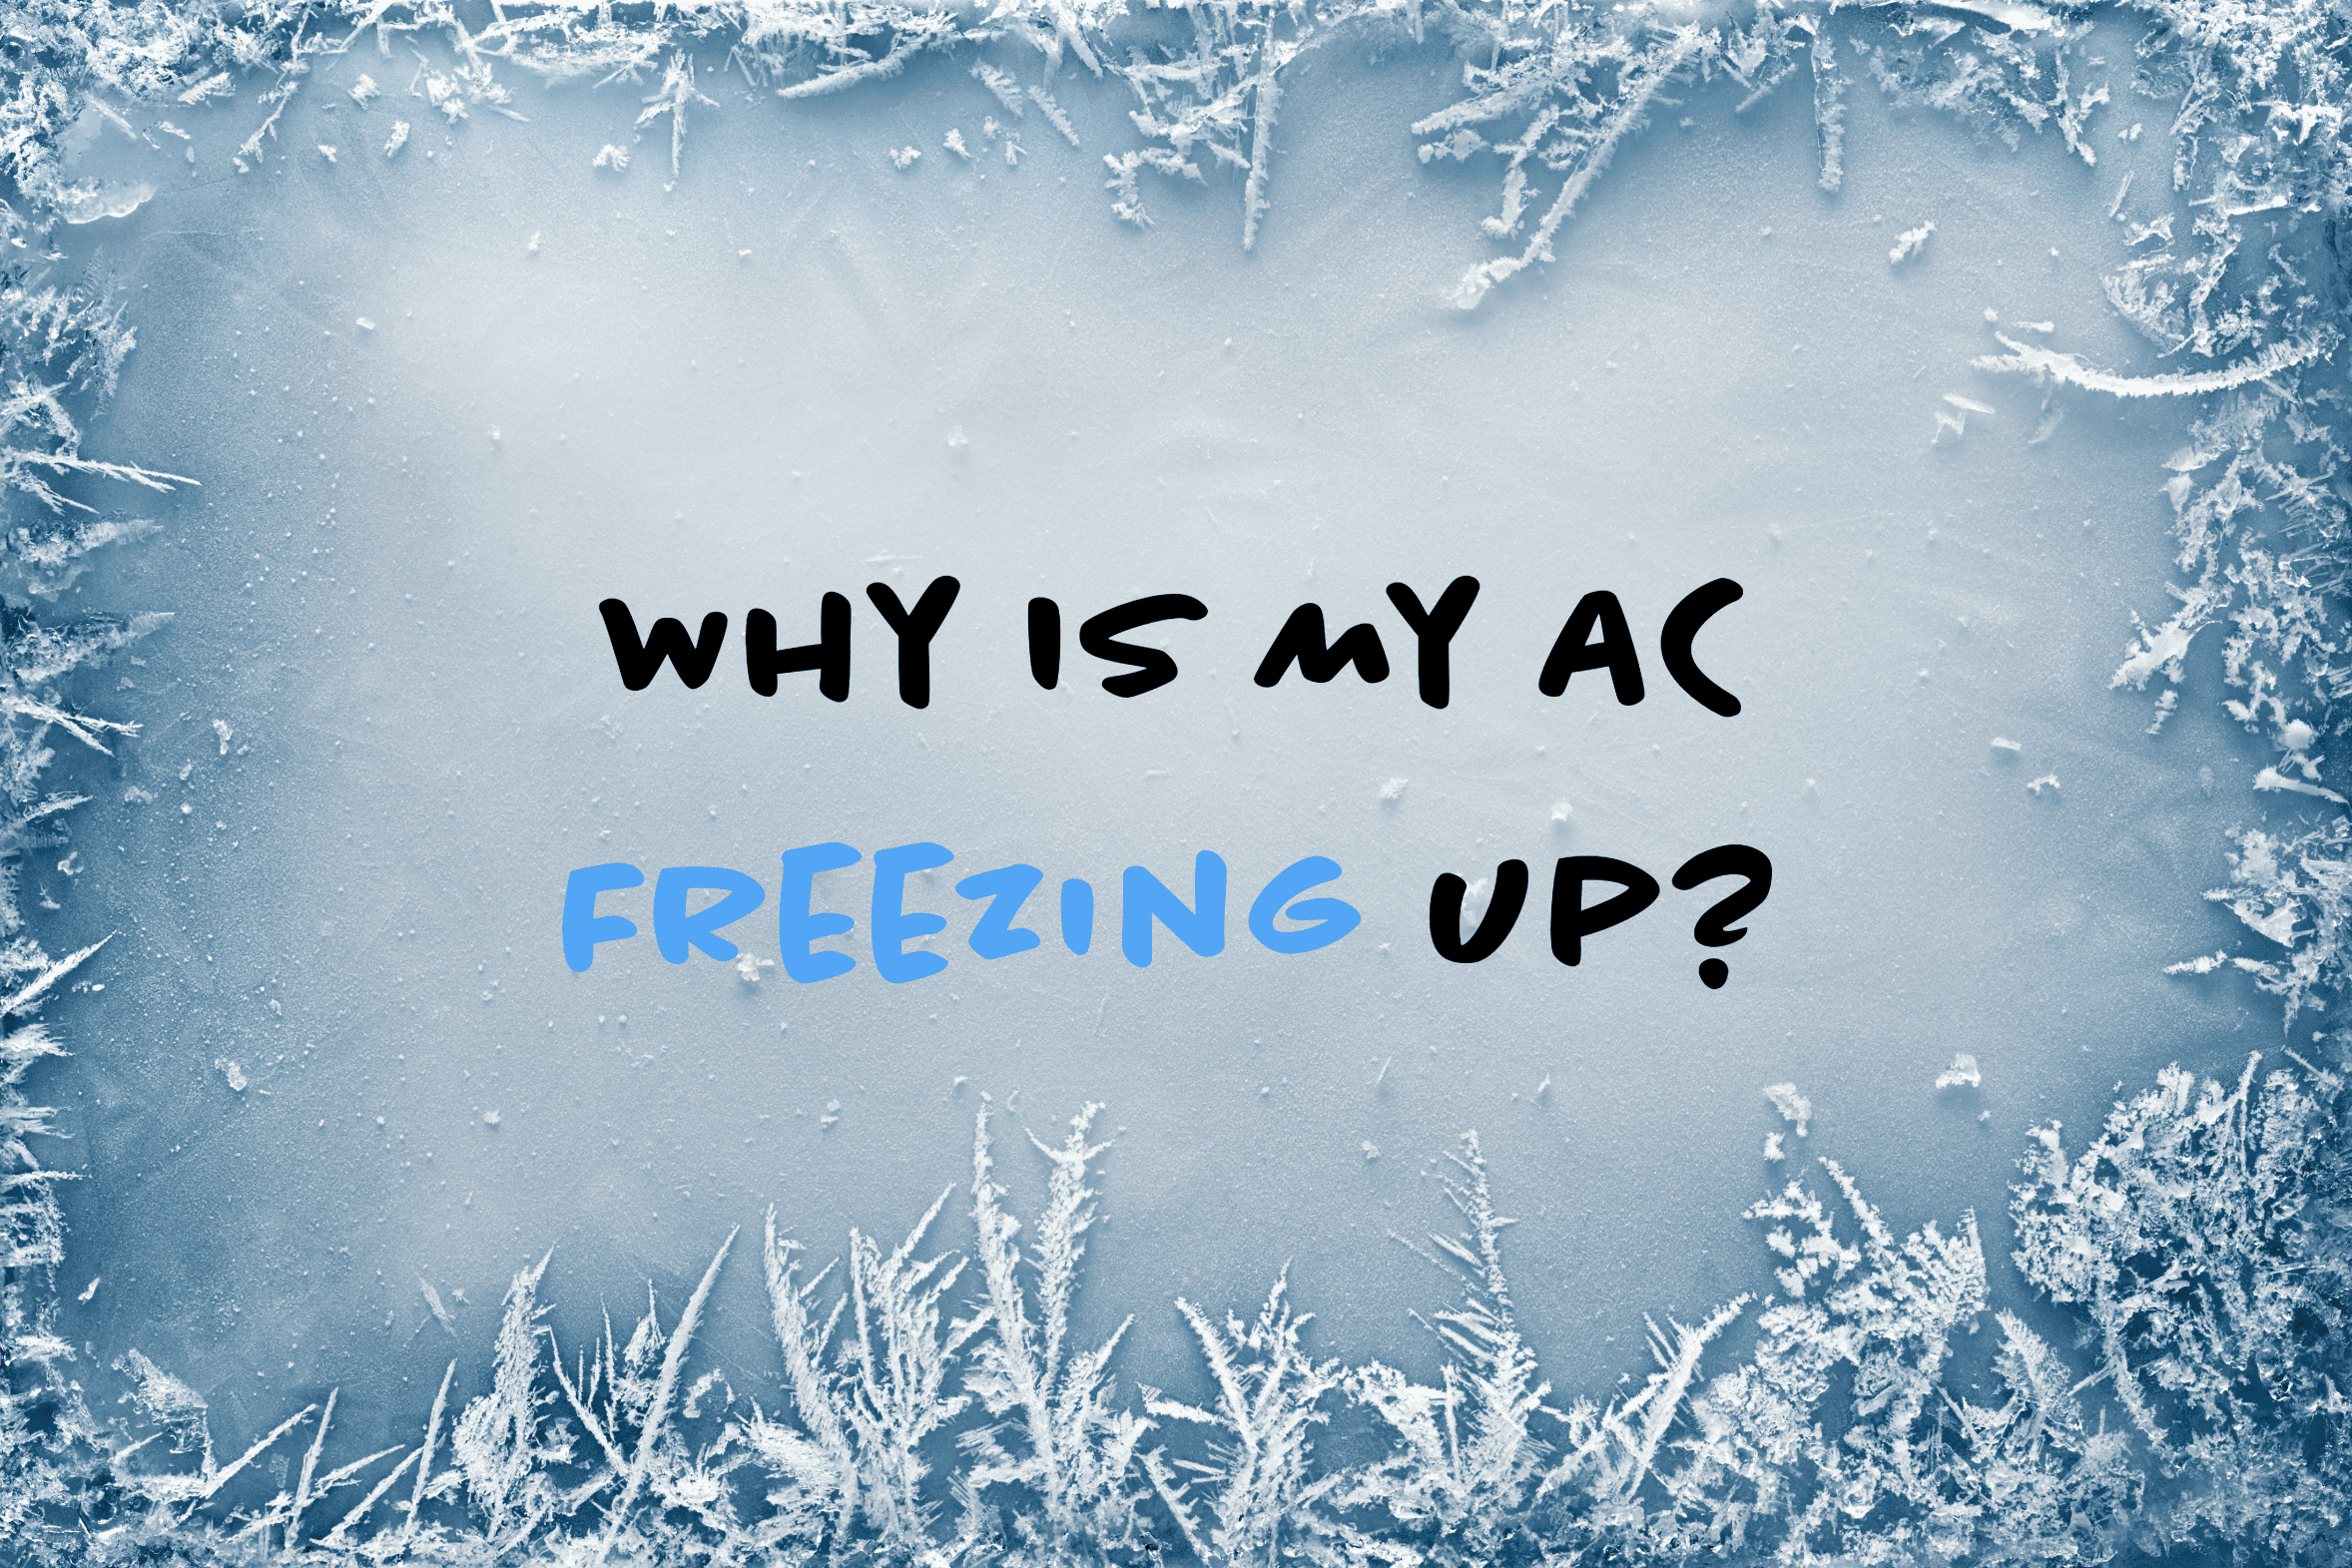 Blog on how to troubleshoot an AC that is freezing up.